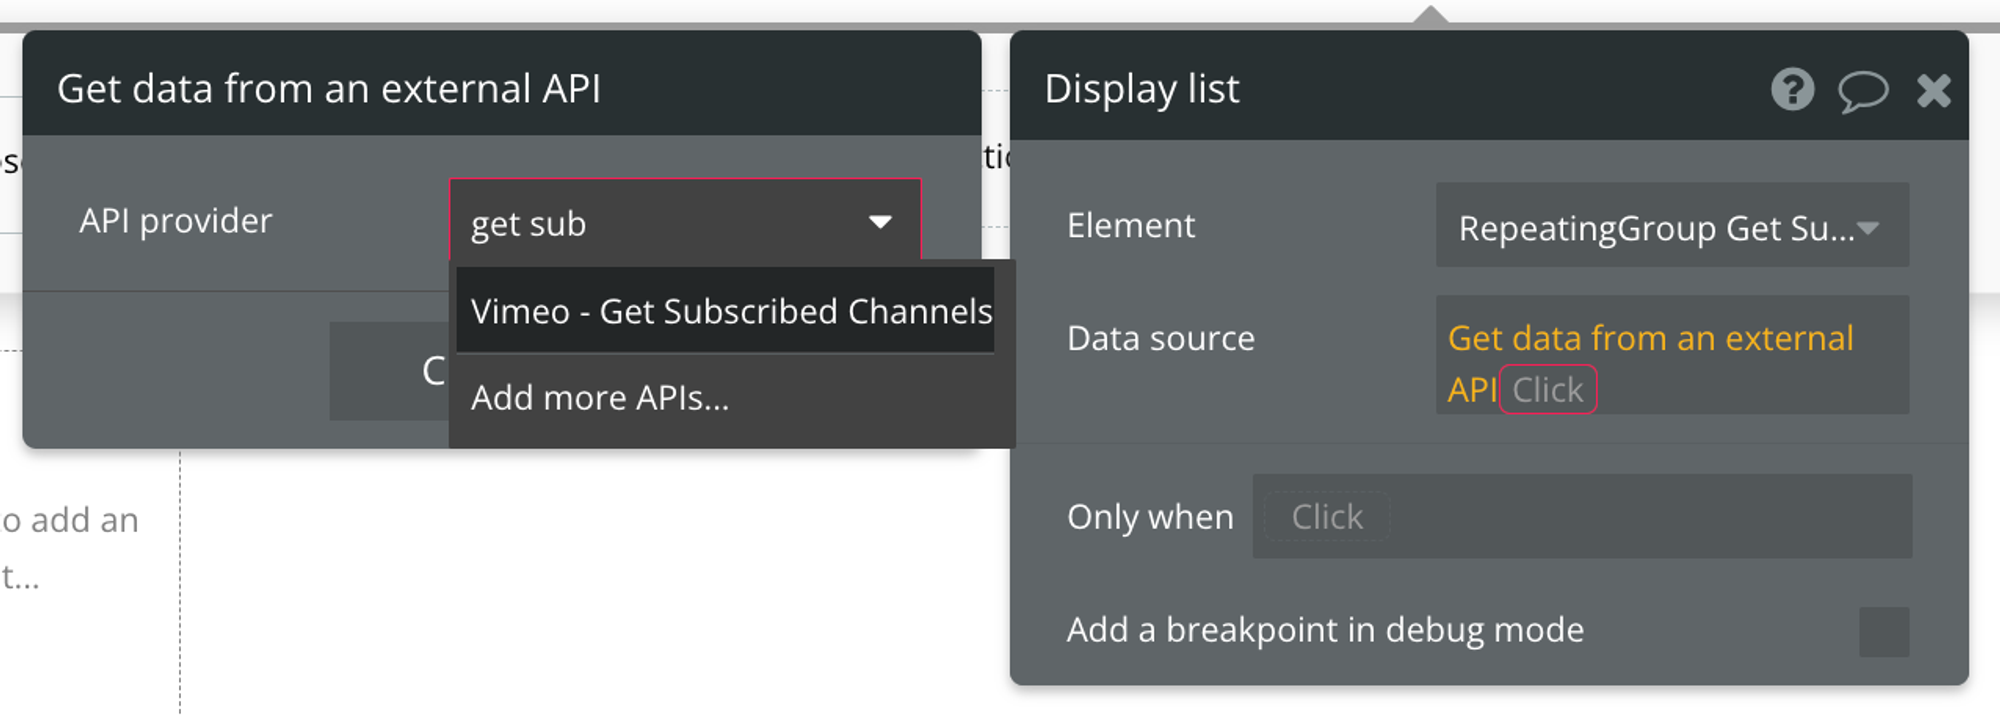 Select "Get data from external API" from the list of data sources, then find Vimeo - Get Subscribed Channels from the list of API providers